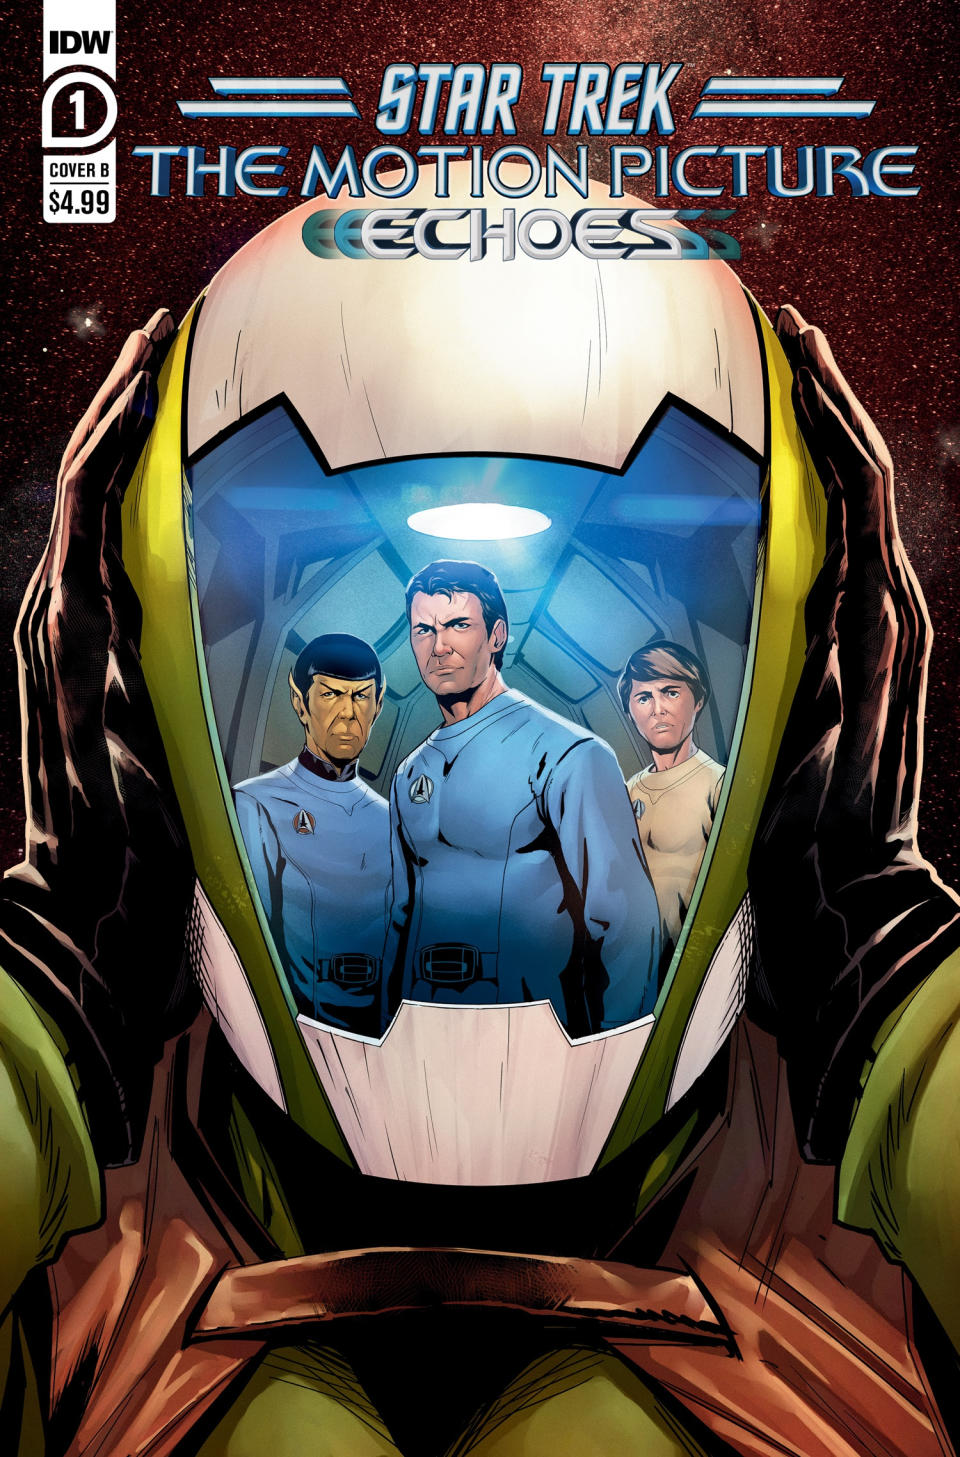 three people in Starfleet uniforms are seen in the reflective visor of another person's spacesuit